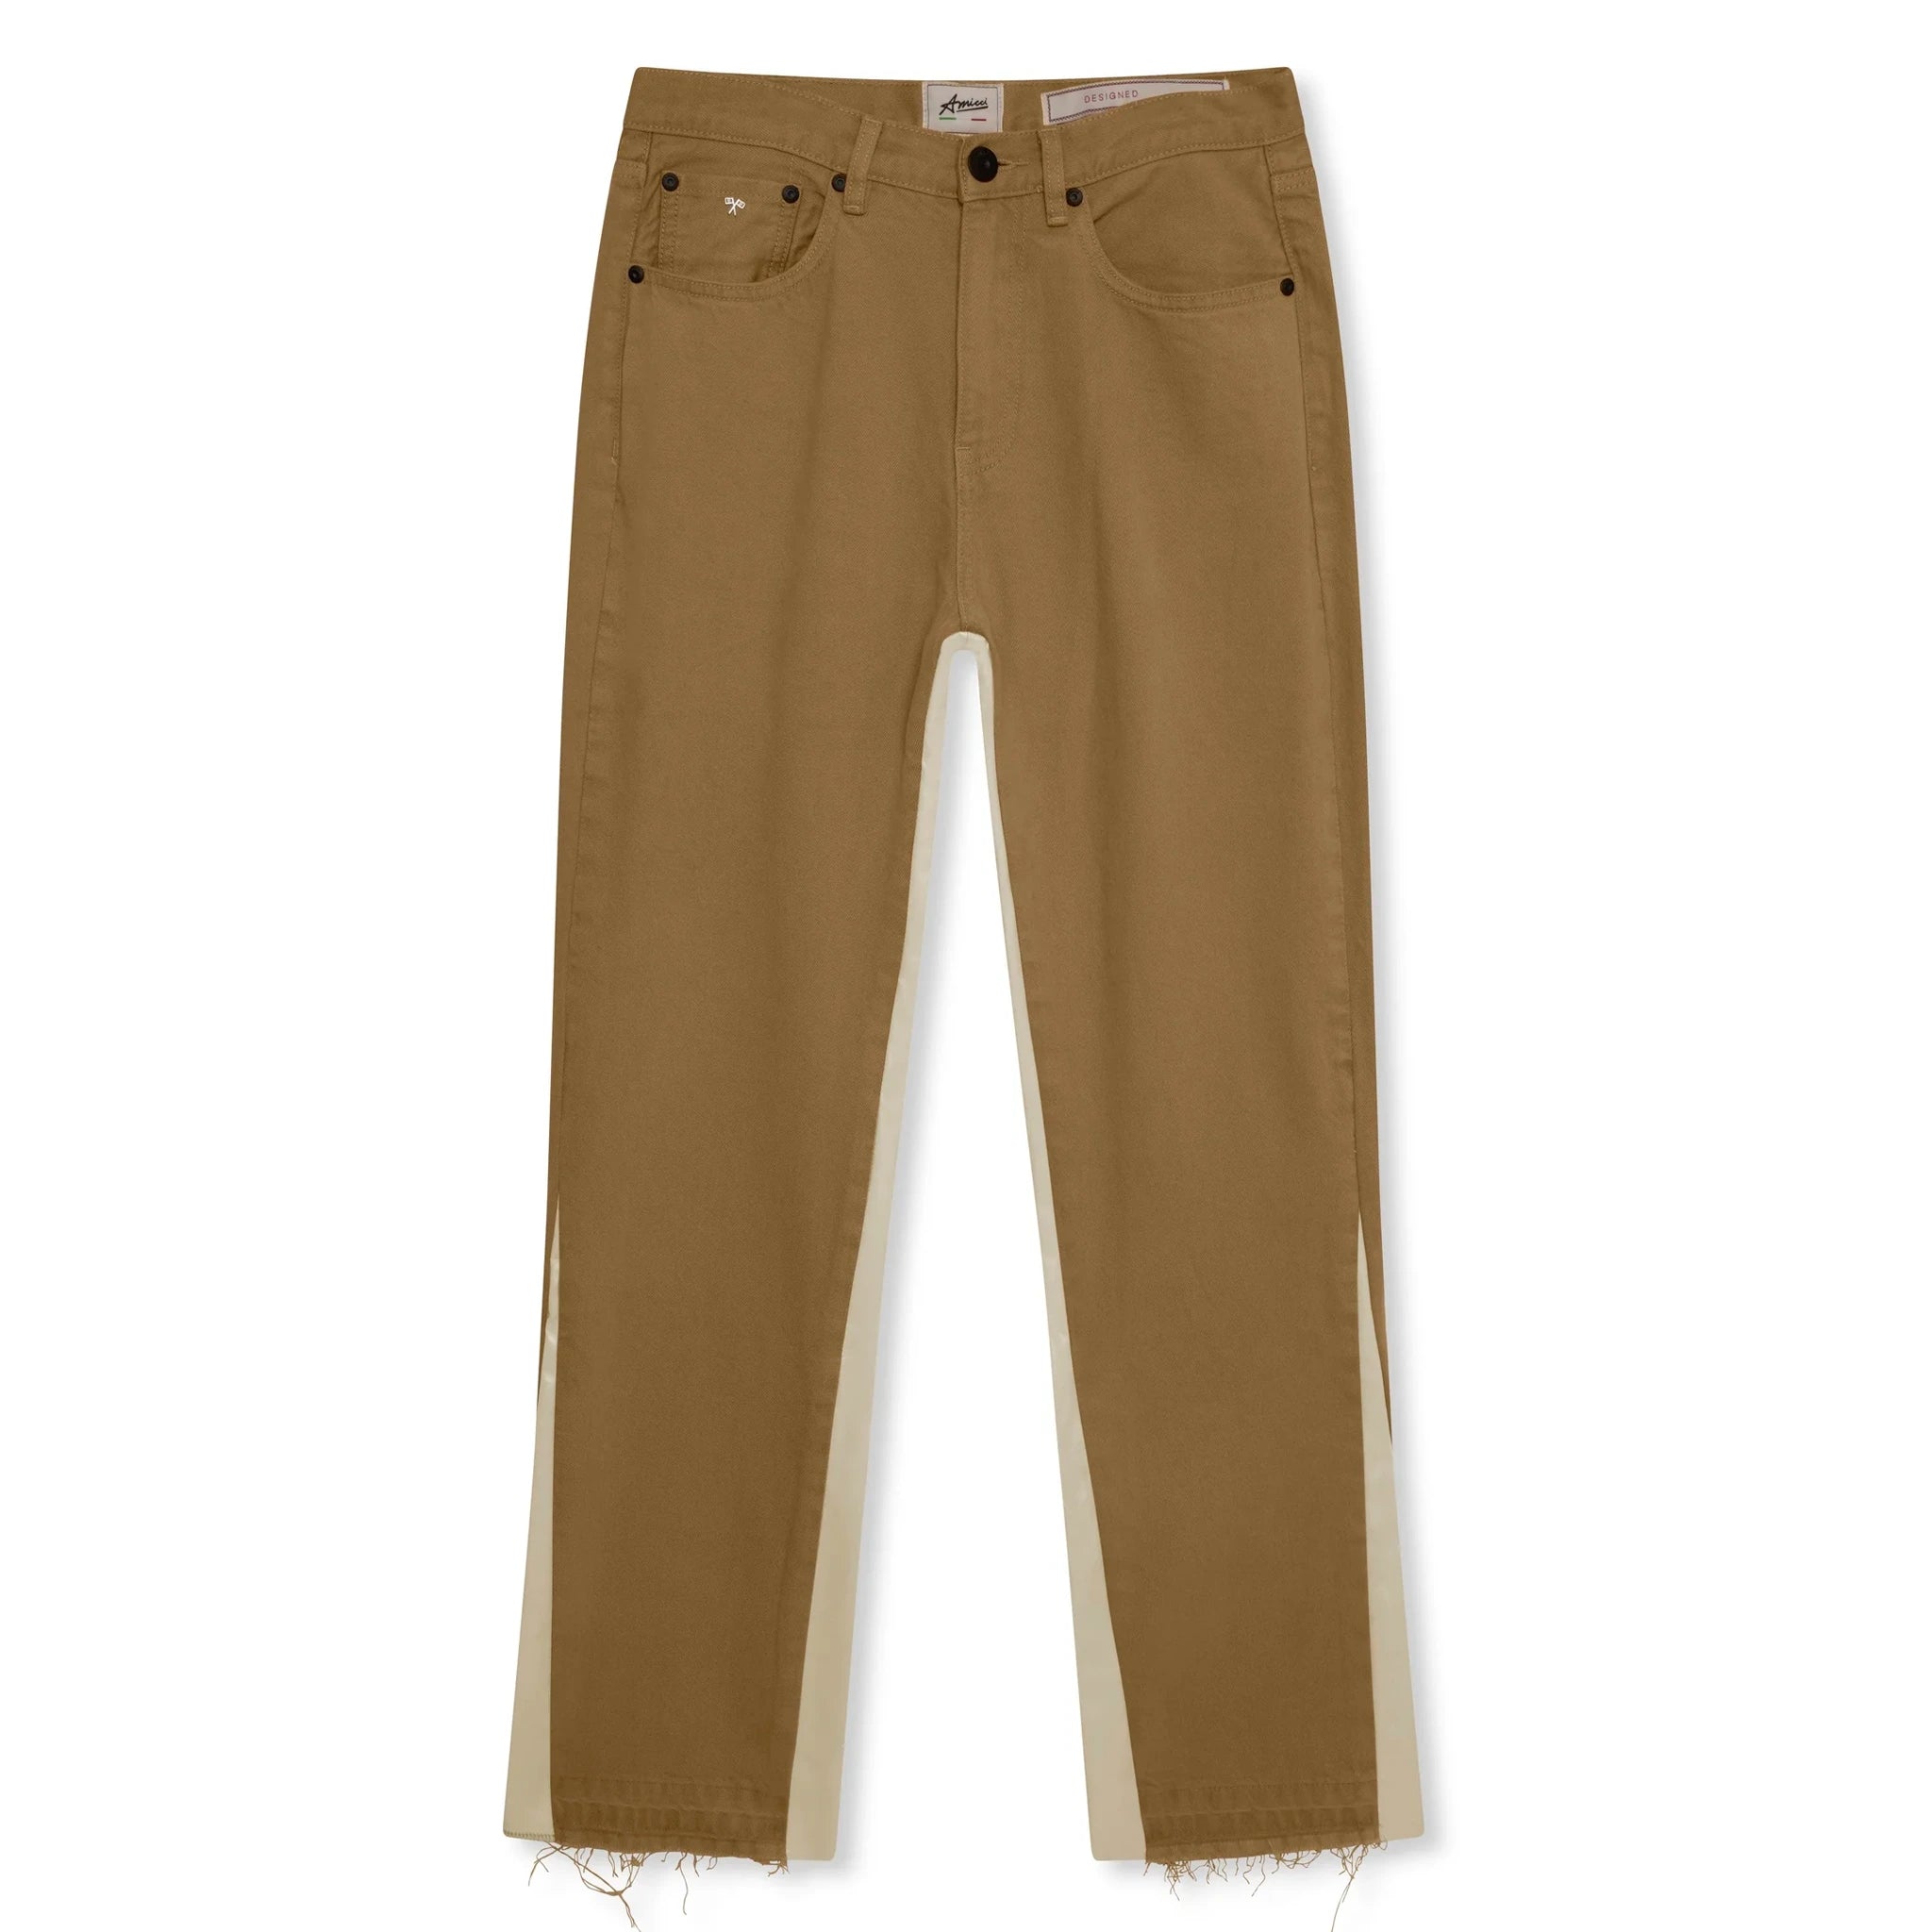 Front view of Amicci Axel Contrast Panel Jeans Tan AMJ08SAN